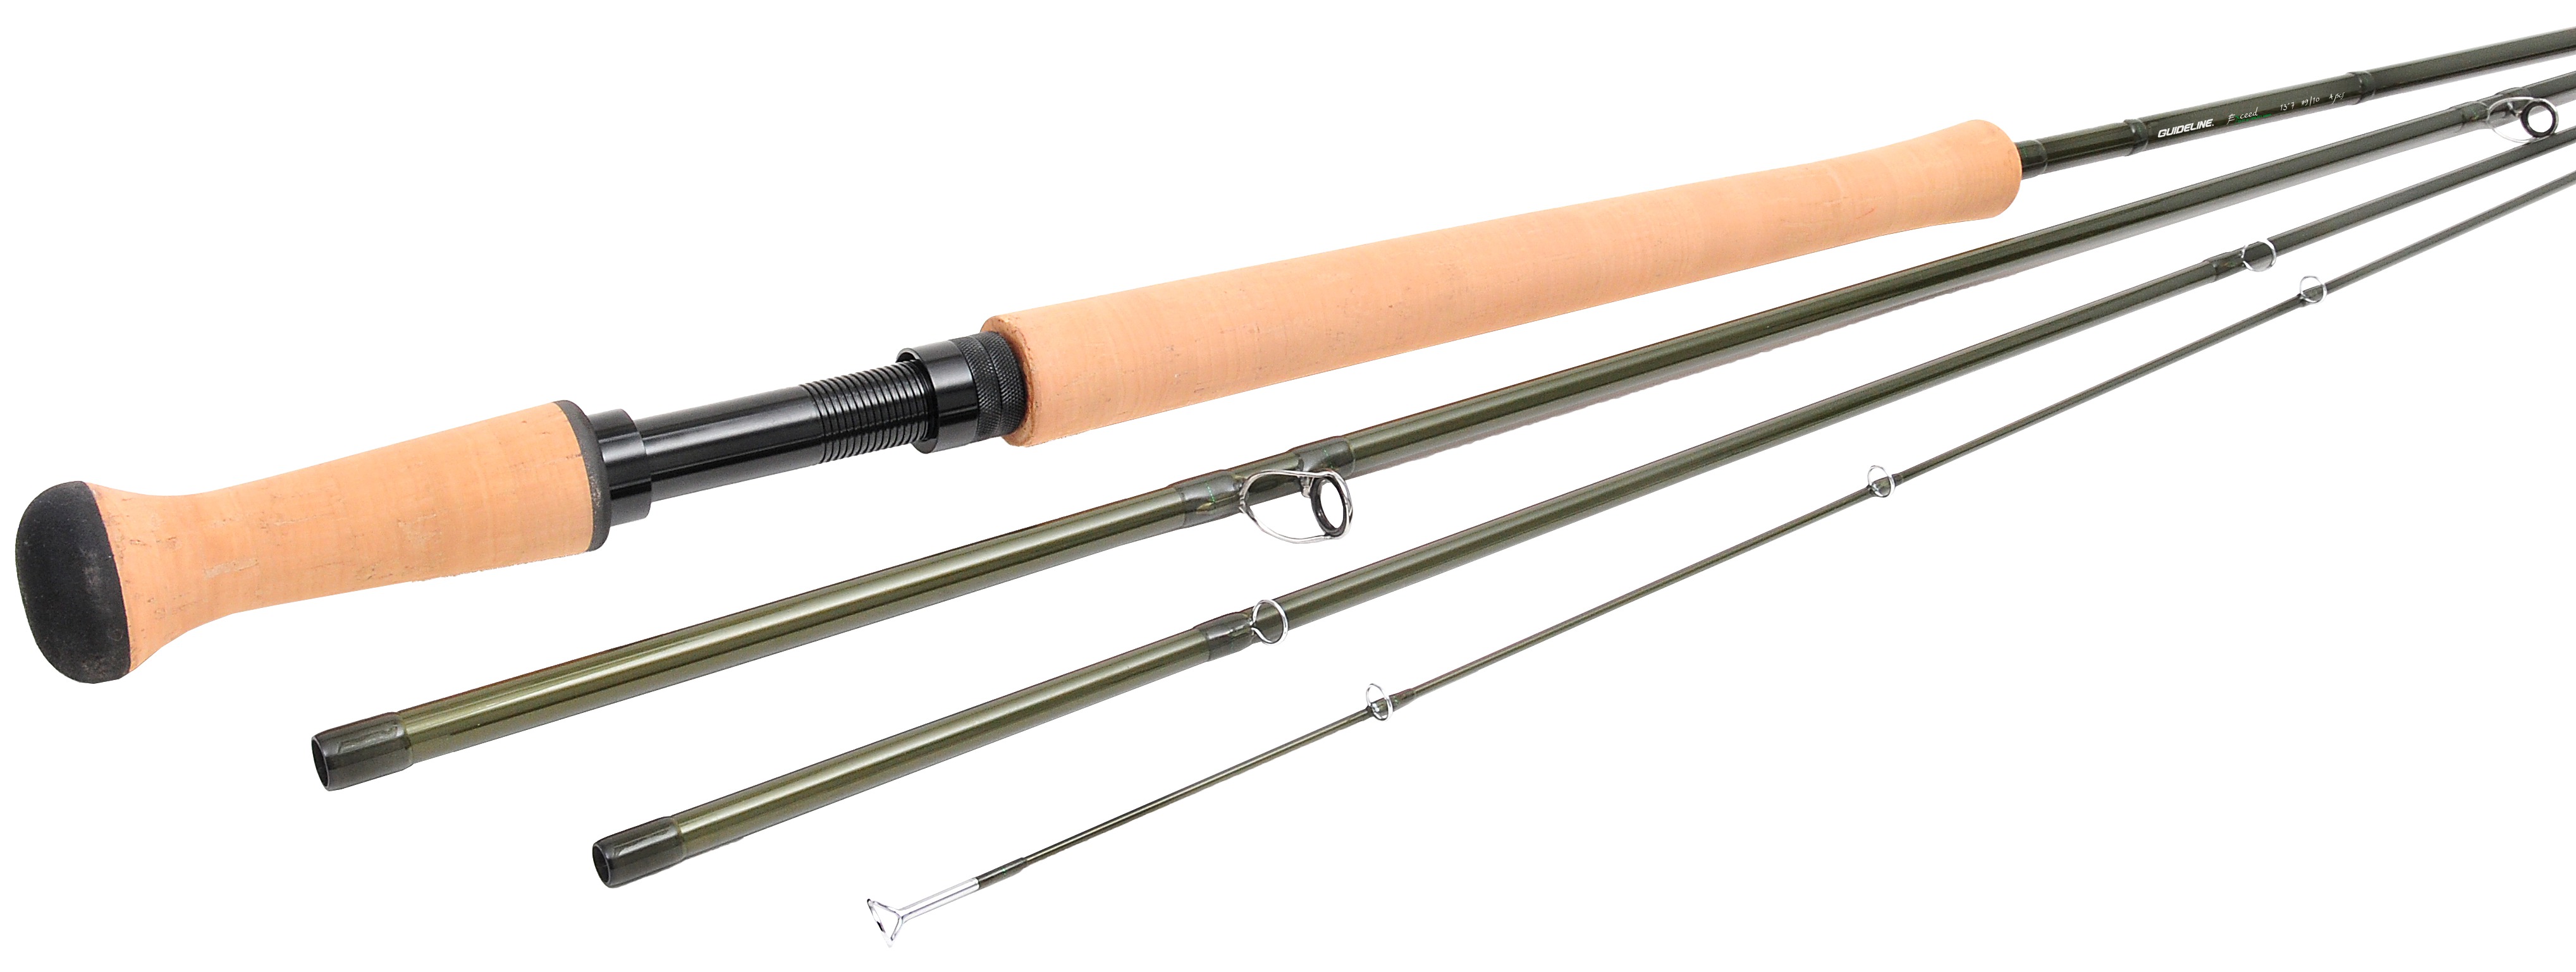 http://www.fishingmegastore.com/hires/guideline/exceed-double-handed-rods.jpg